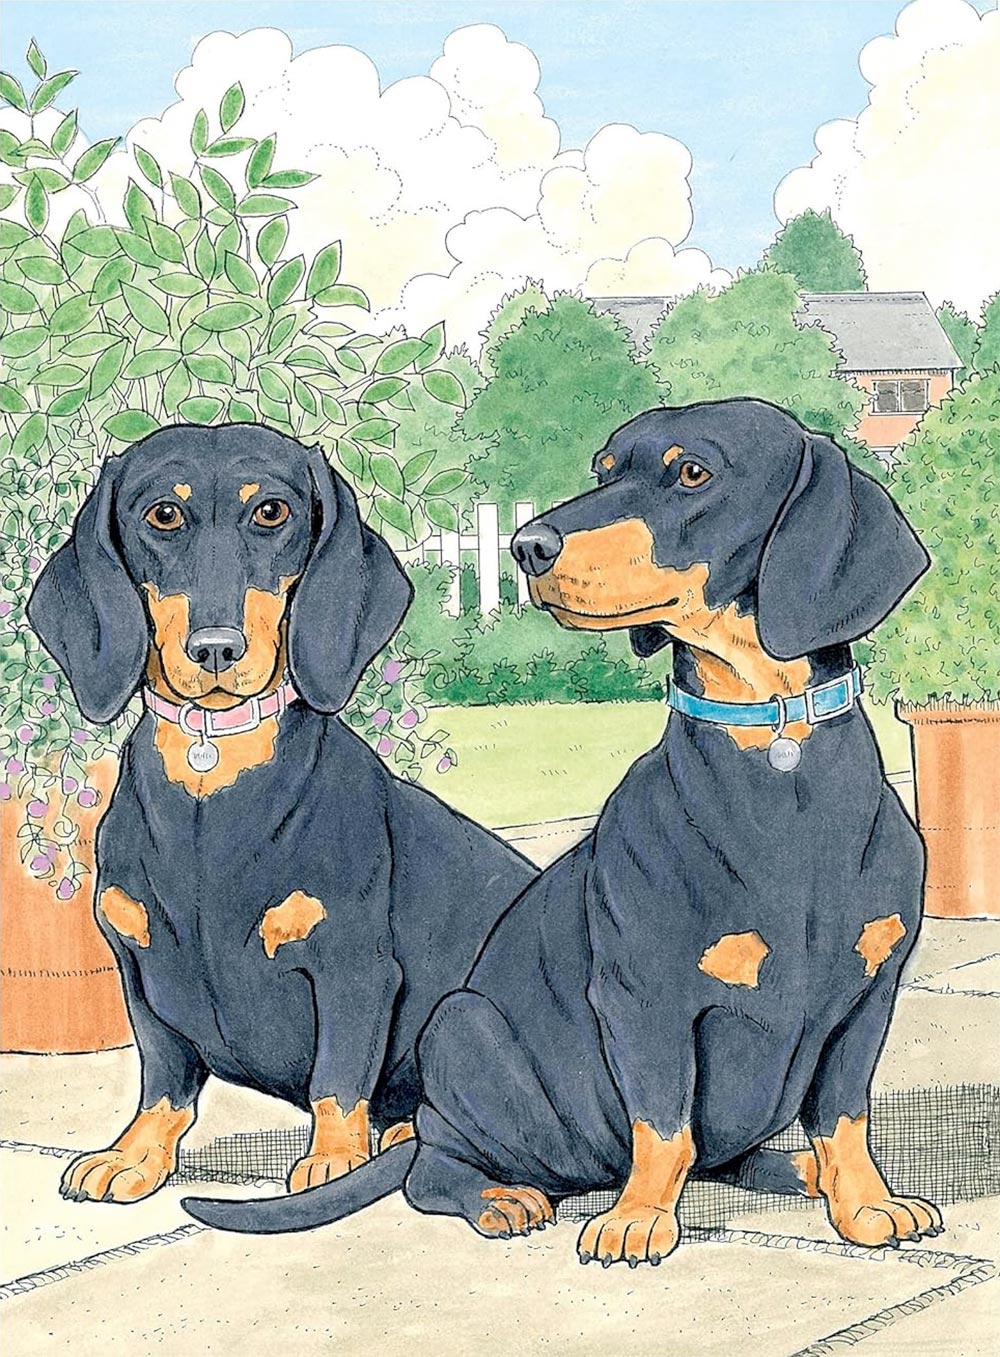 The Dog Lovers' Coloring Book